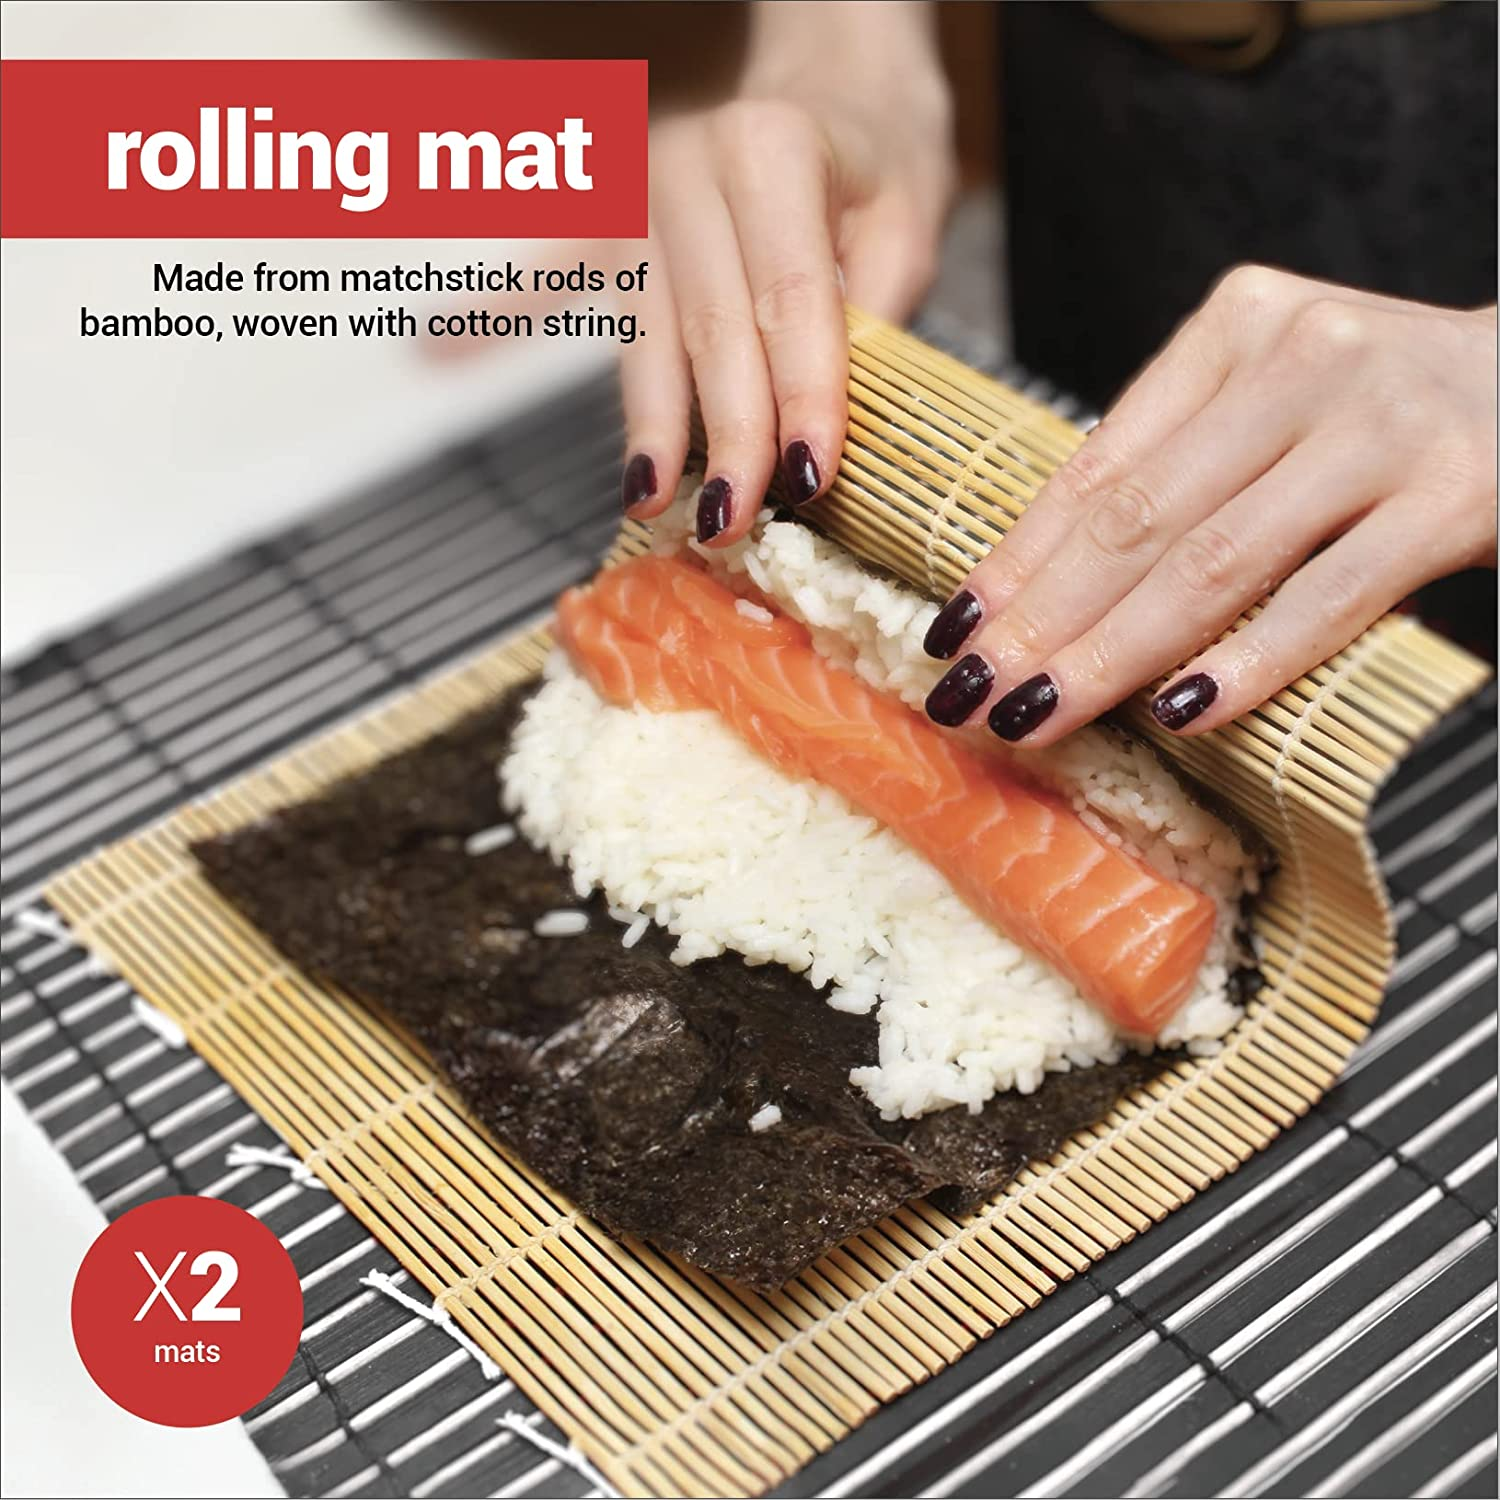 Sushi Making Kit Deluxe - Includes 2 Bamboo Sushi Rolling Mats, Rice Spreader, Rice Paddle, 5 Pairs Chopsticks - 100% Bamboo Home Sushi Maker Kit for Beginners - Great Gift Idea for Chef - Roller Mat